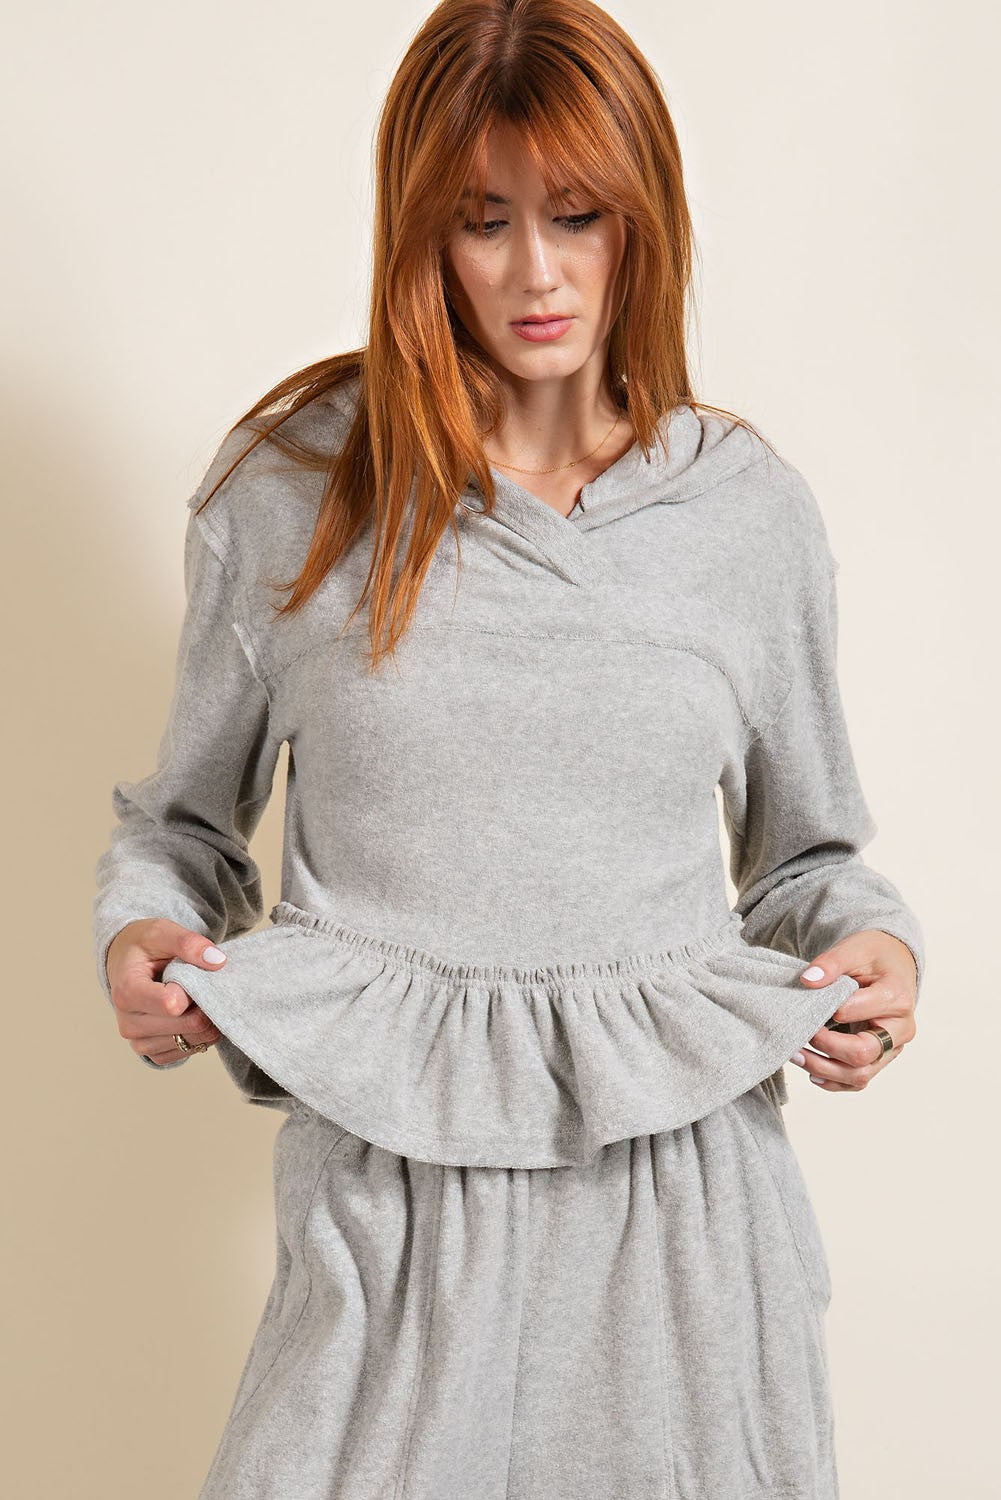 Easel Heather Grey Towel Knit Crop Length Ruffled Bottom Relax Pullover Hoodie - Roulhac Fashion Boutique